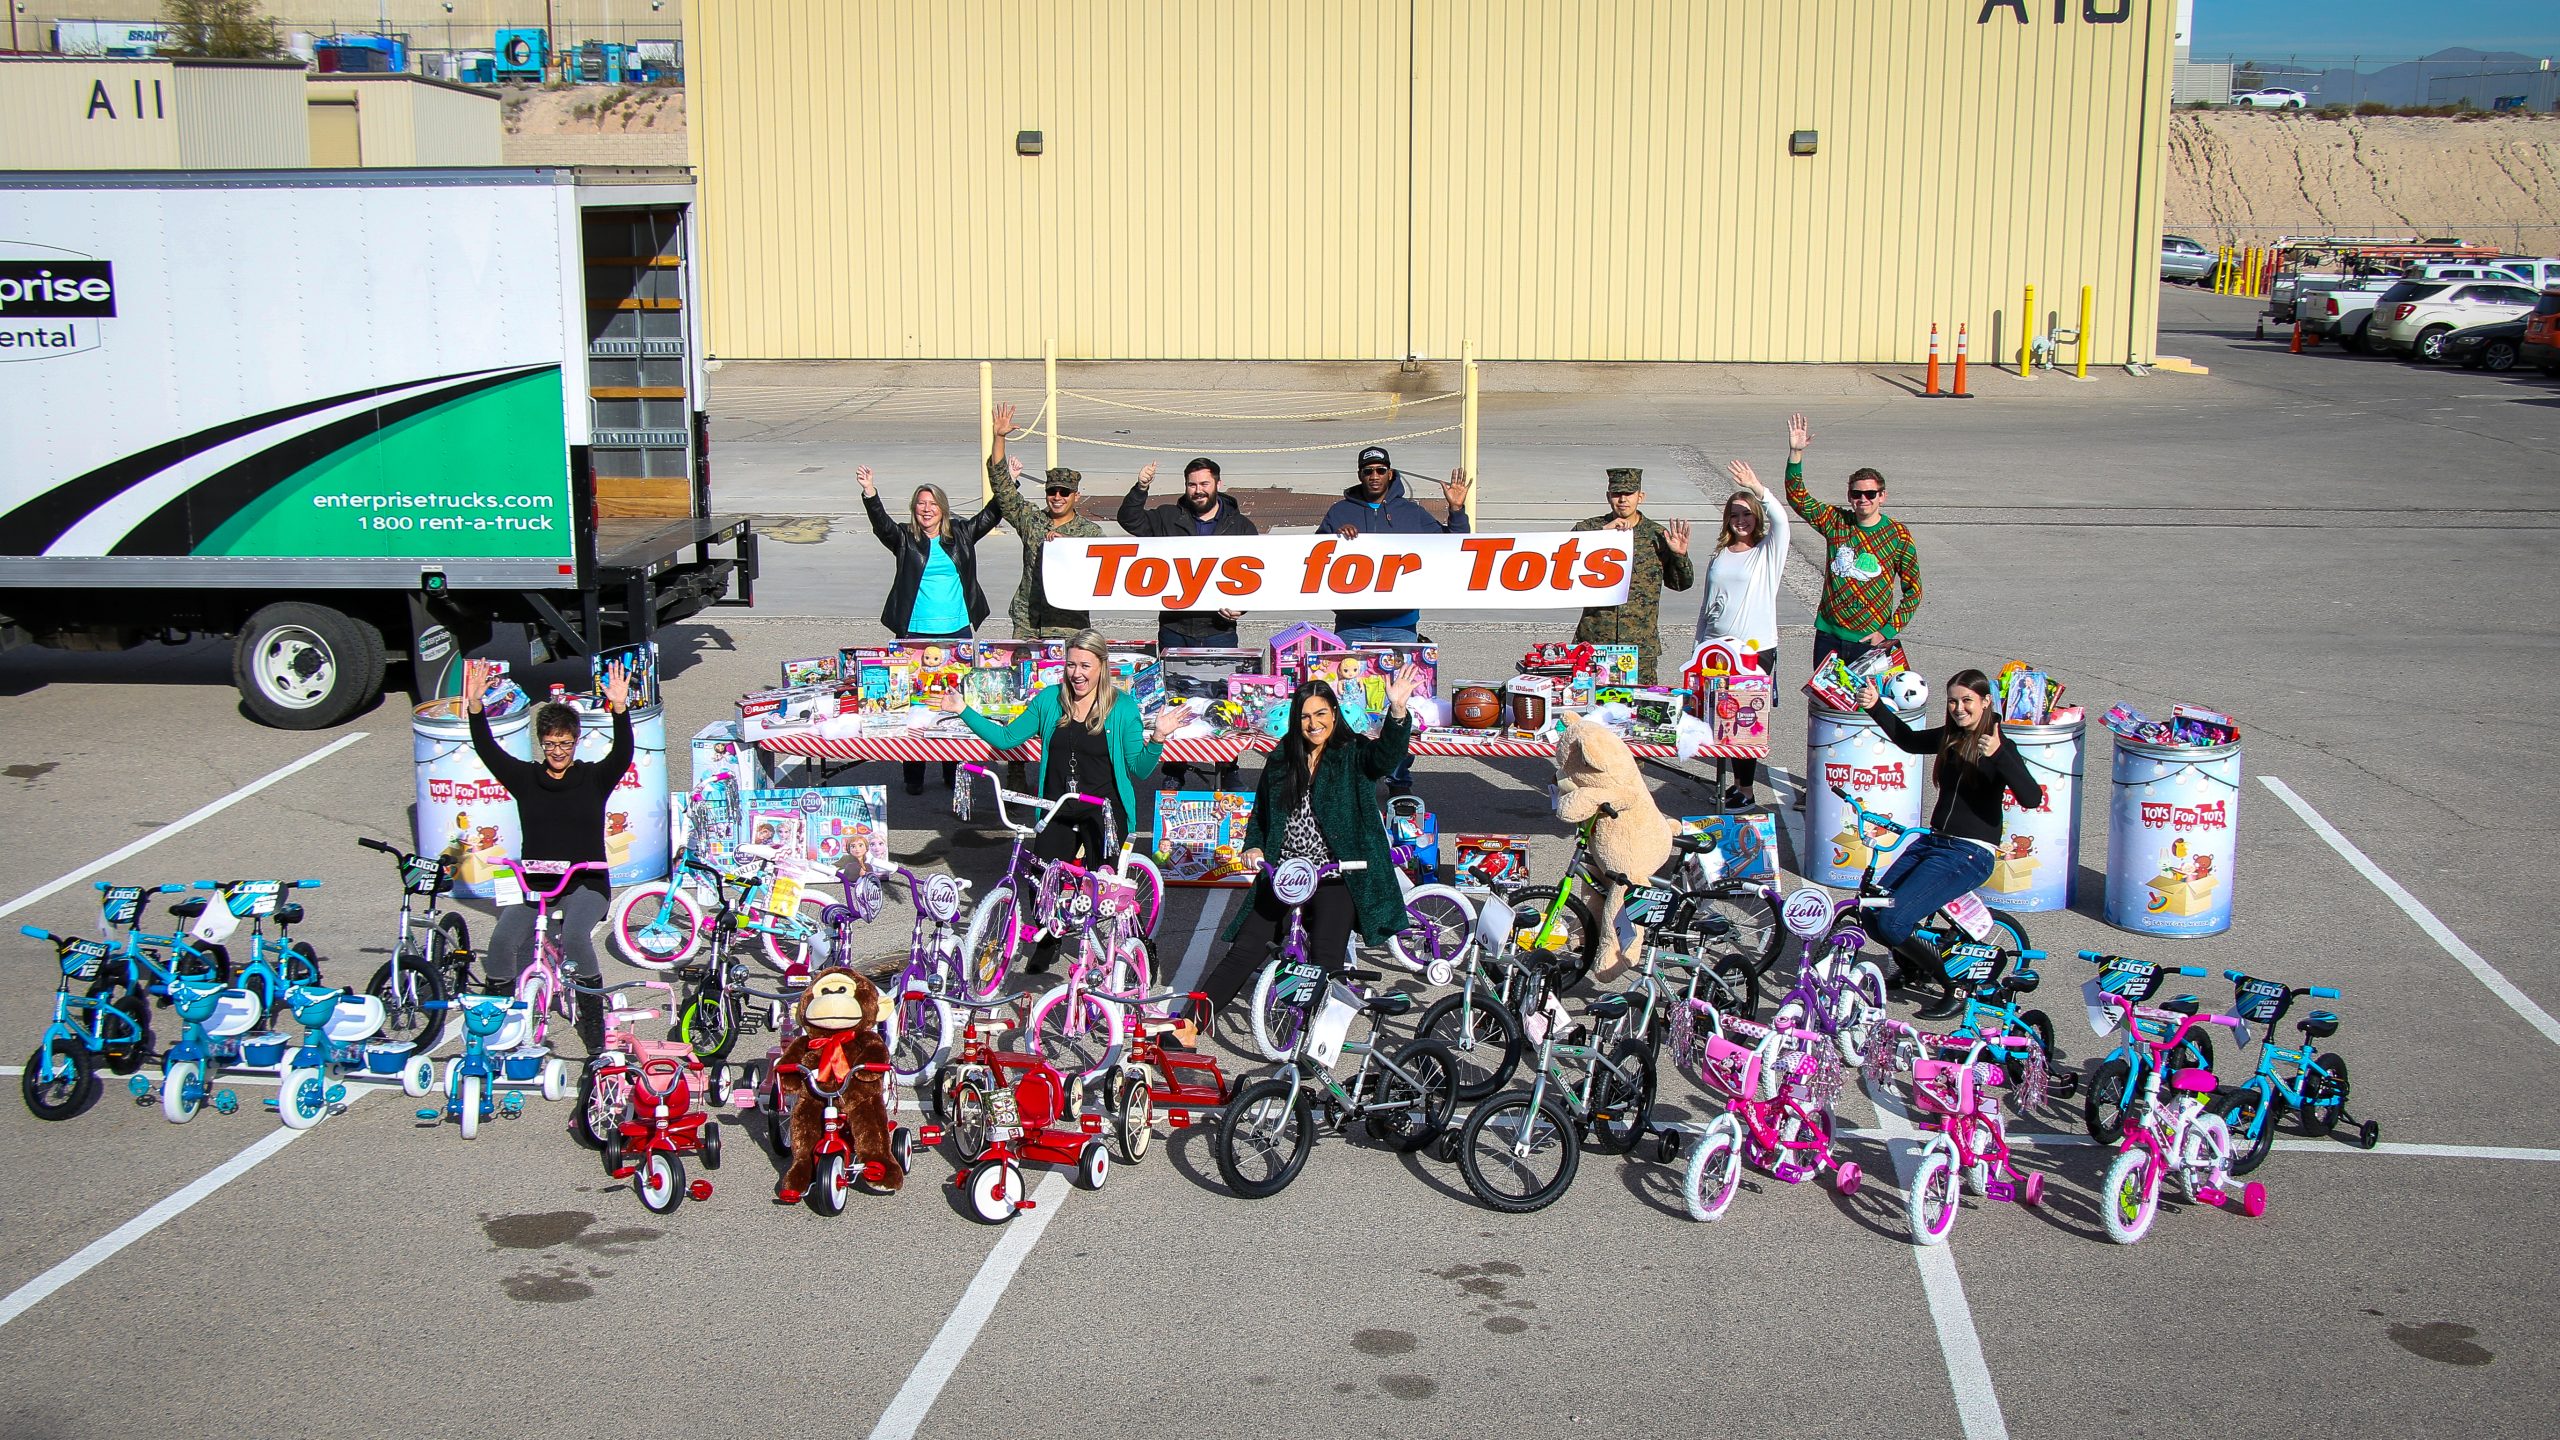 Bicycles and toys displayed in parking lot with people waving and a truck to the left